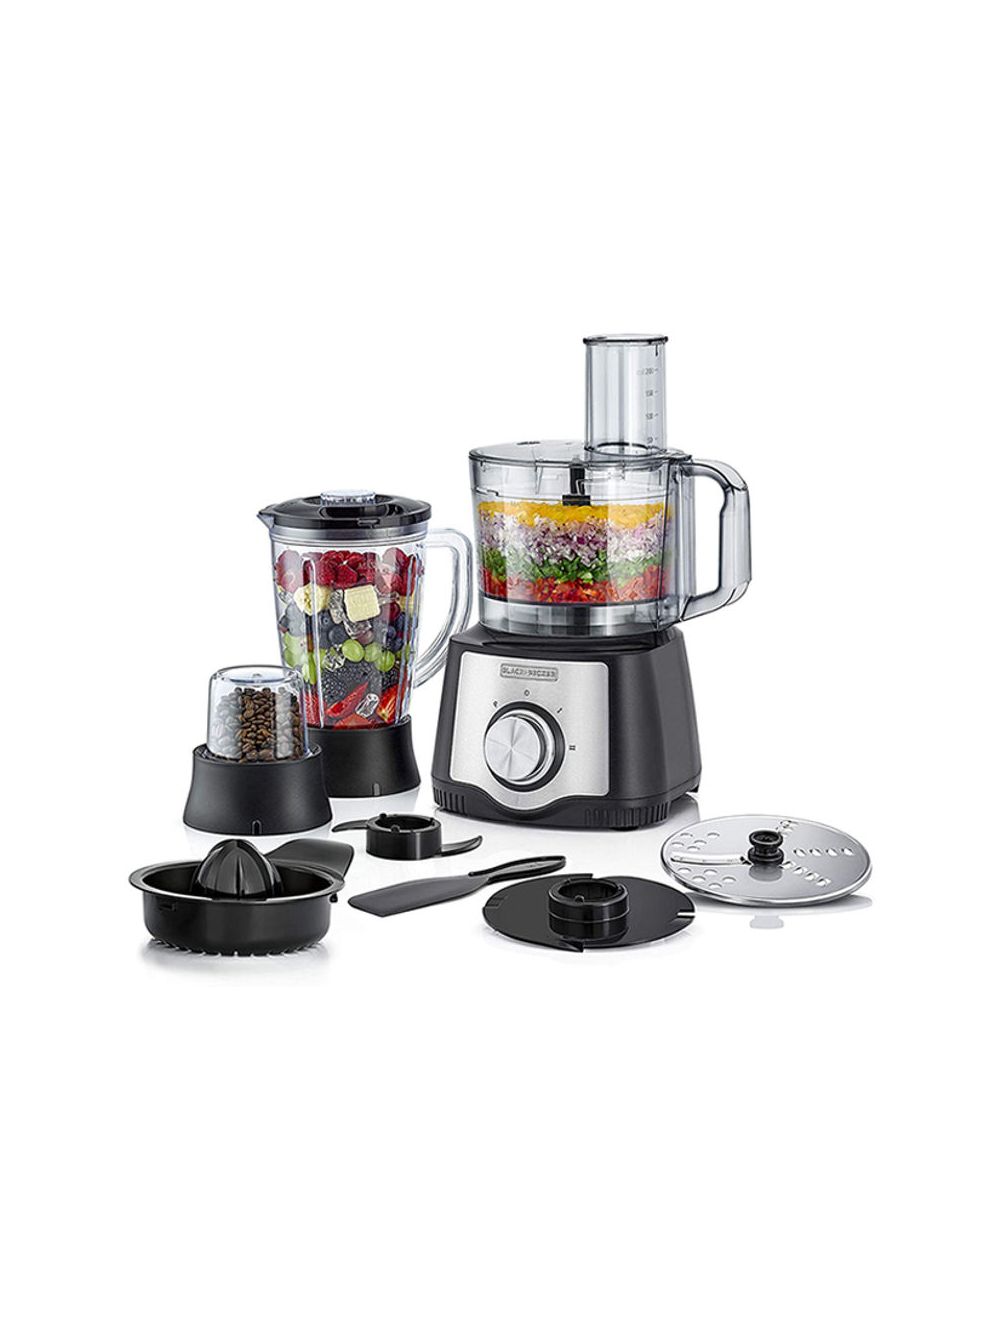 600 W 29 Function Food Processor with Blender, Mill and Juicer-FX650-B5